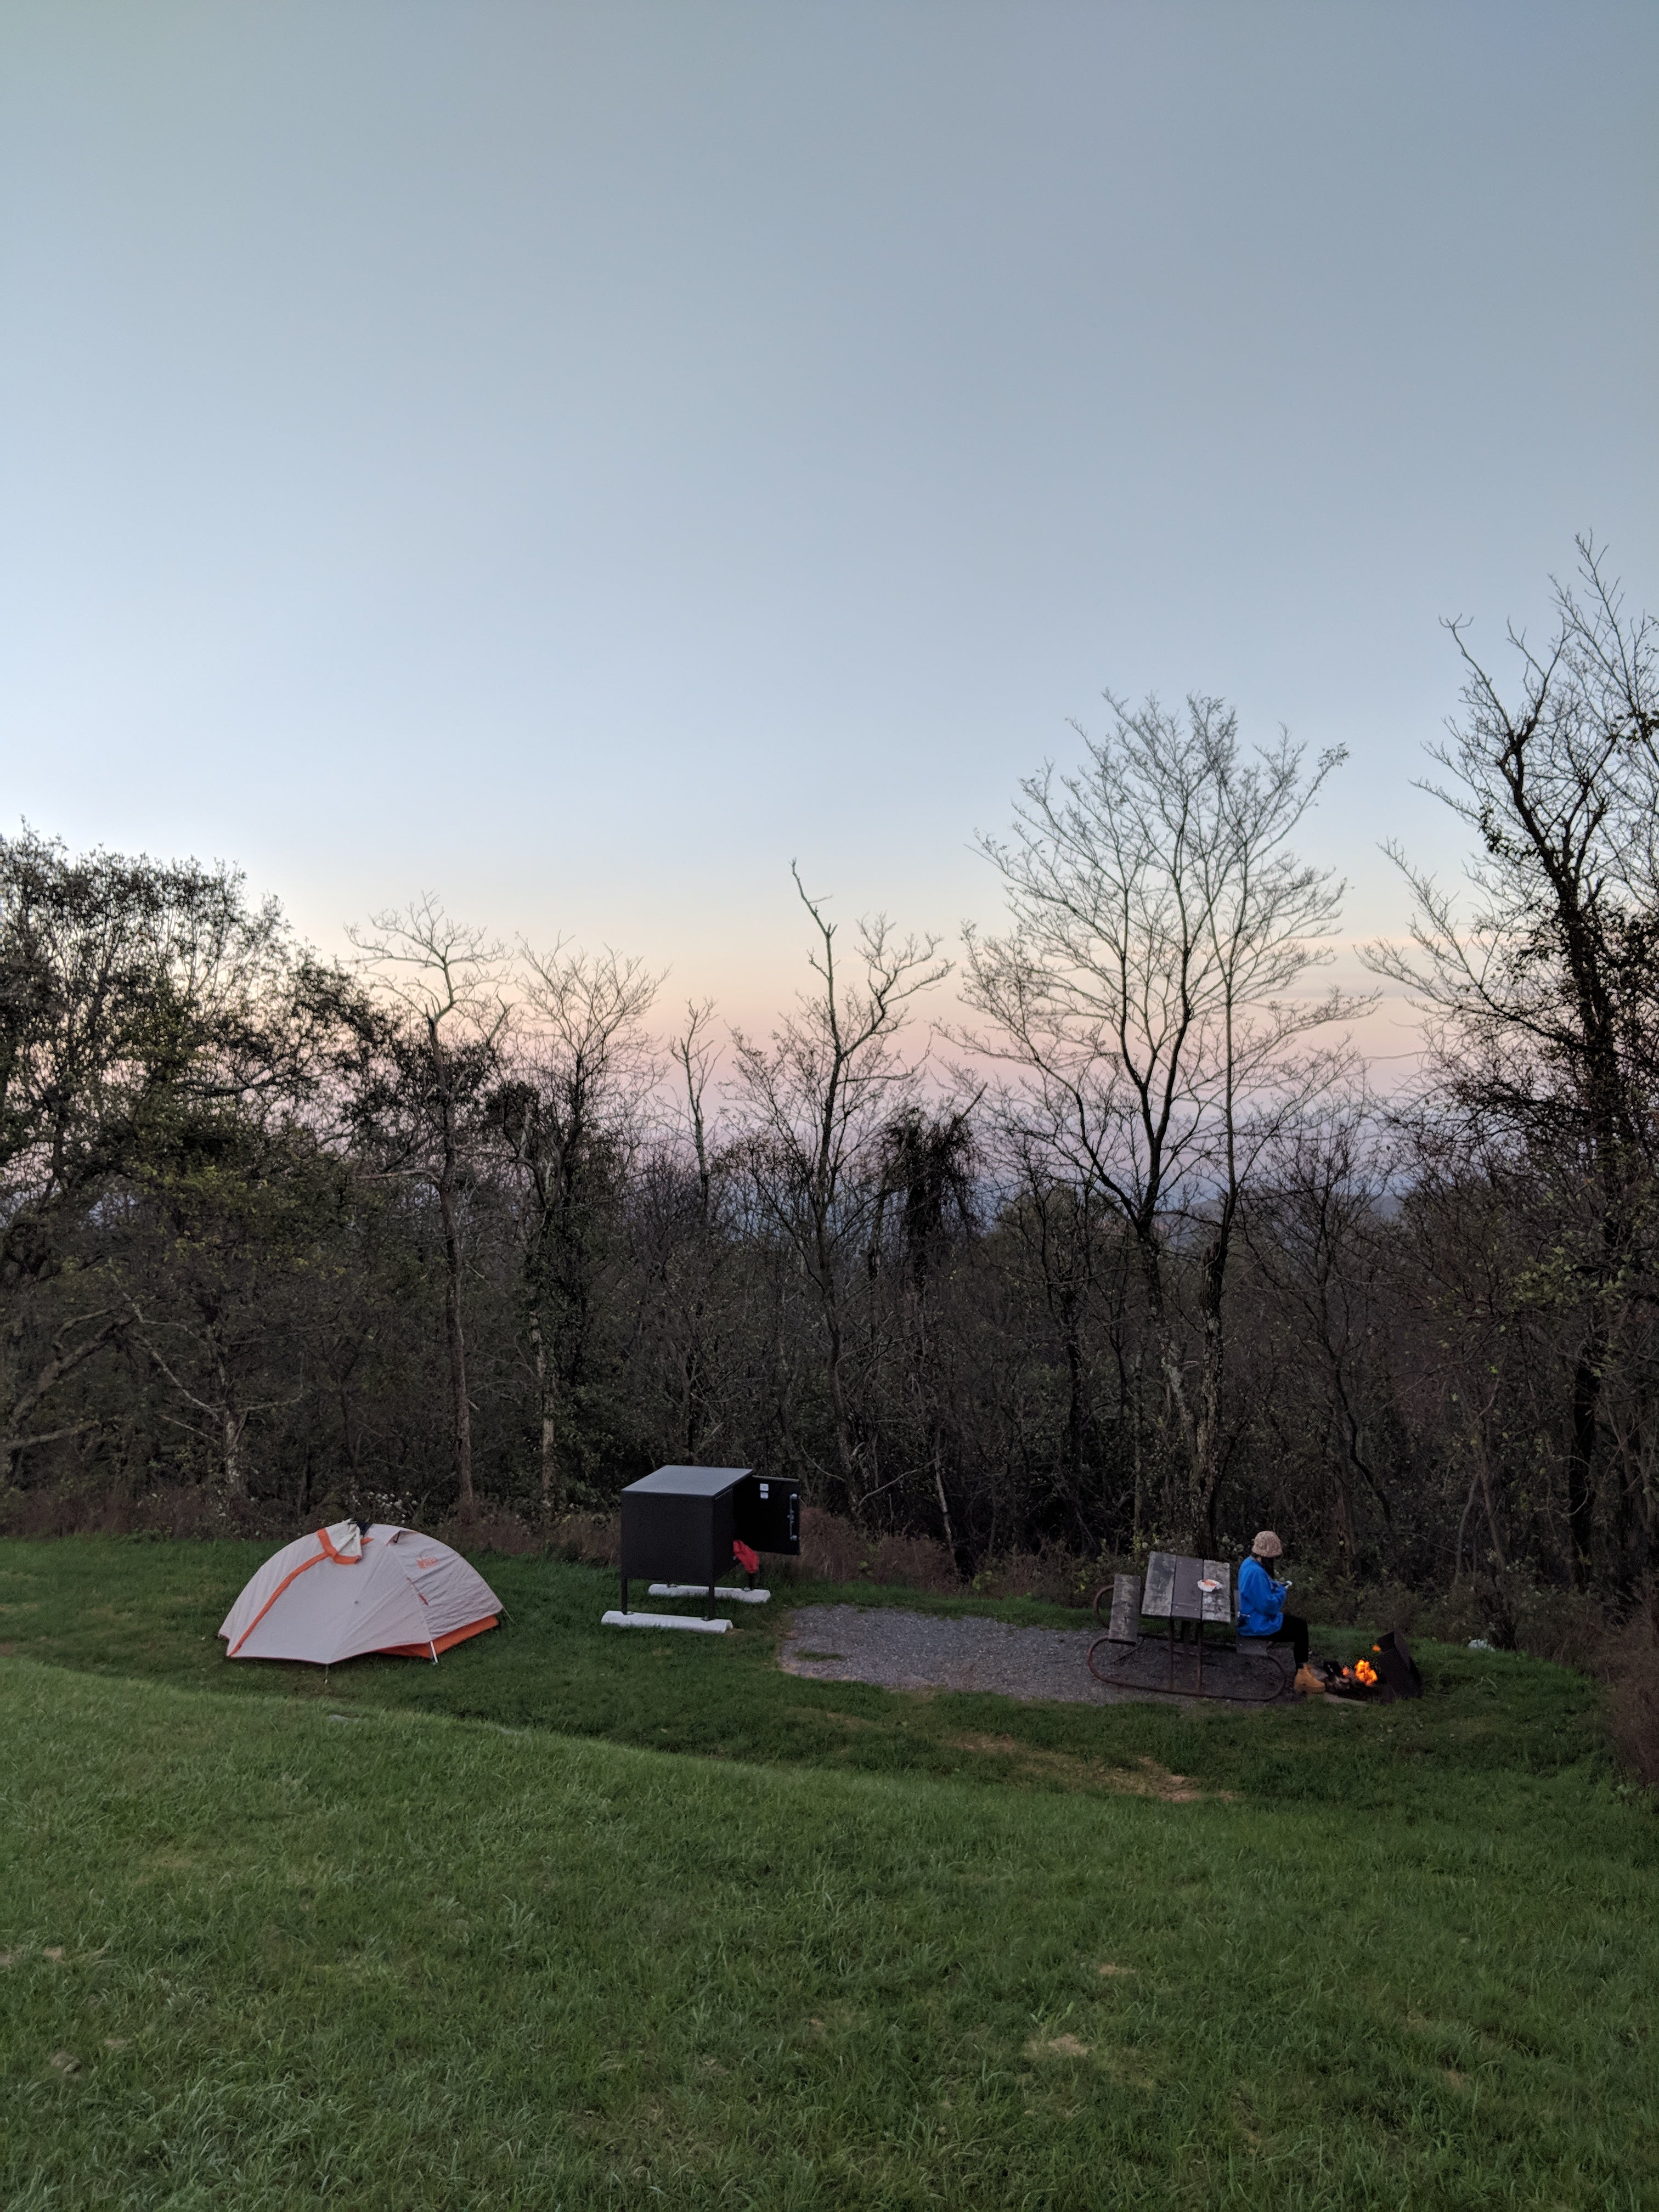 View from our campsite at sunset